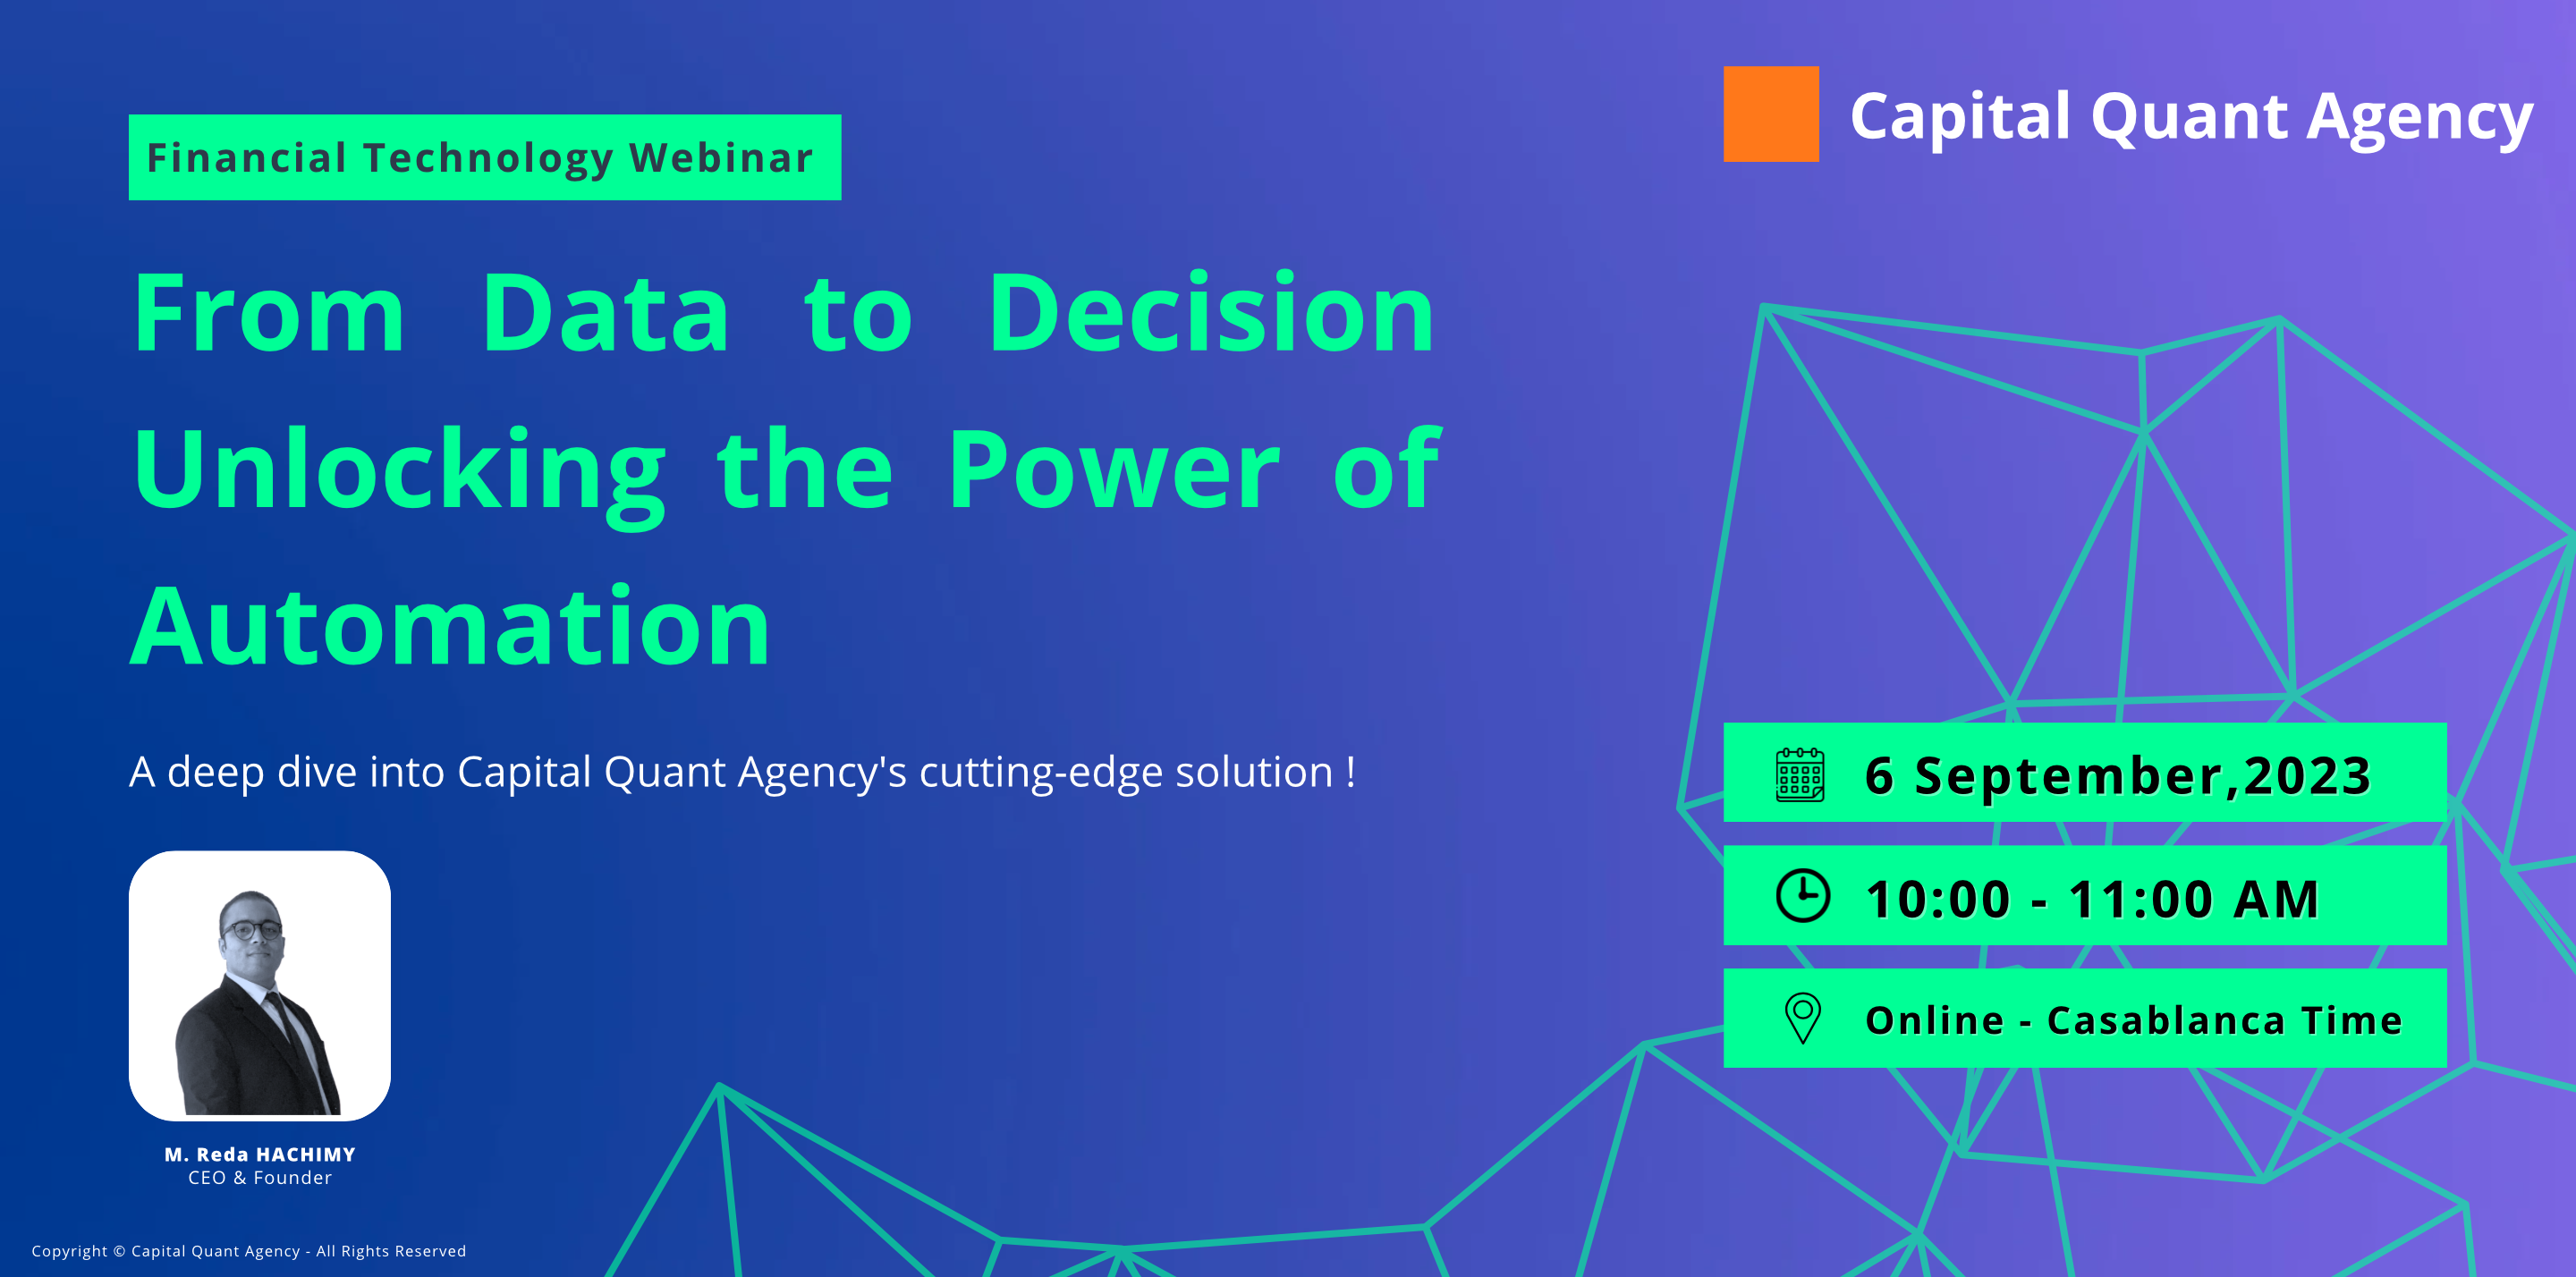 WEBINAR .: From Data to Decision Unlocking the Power of Automation, Online Event